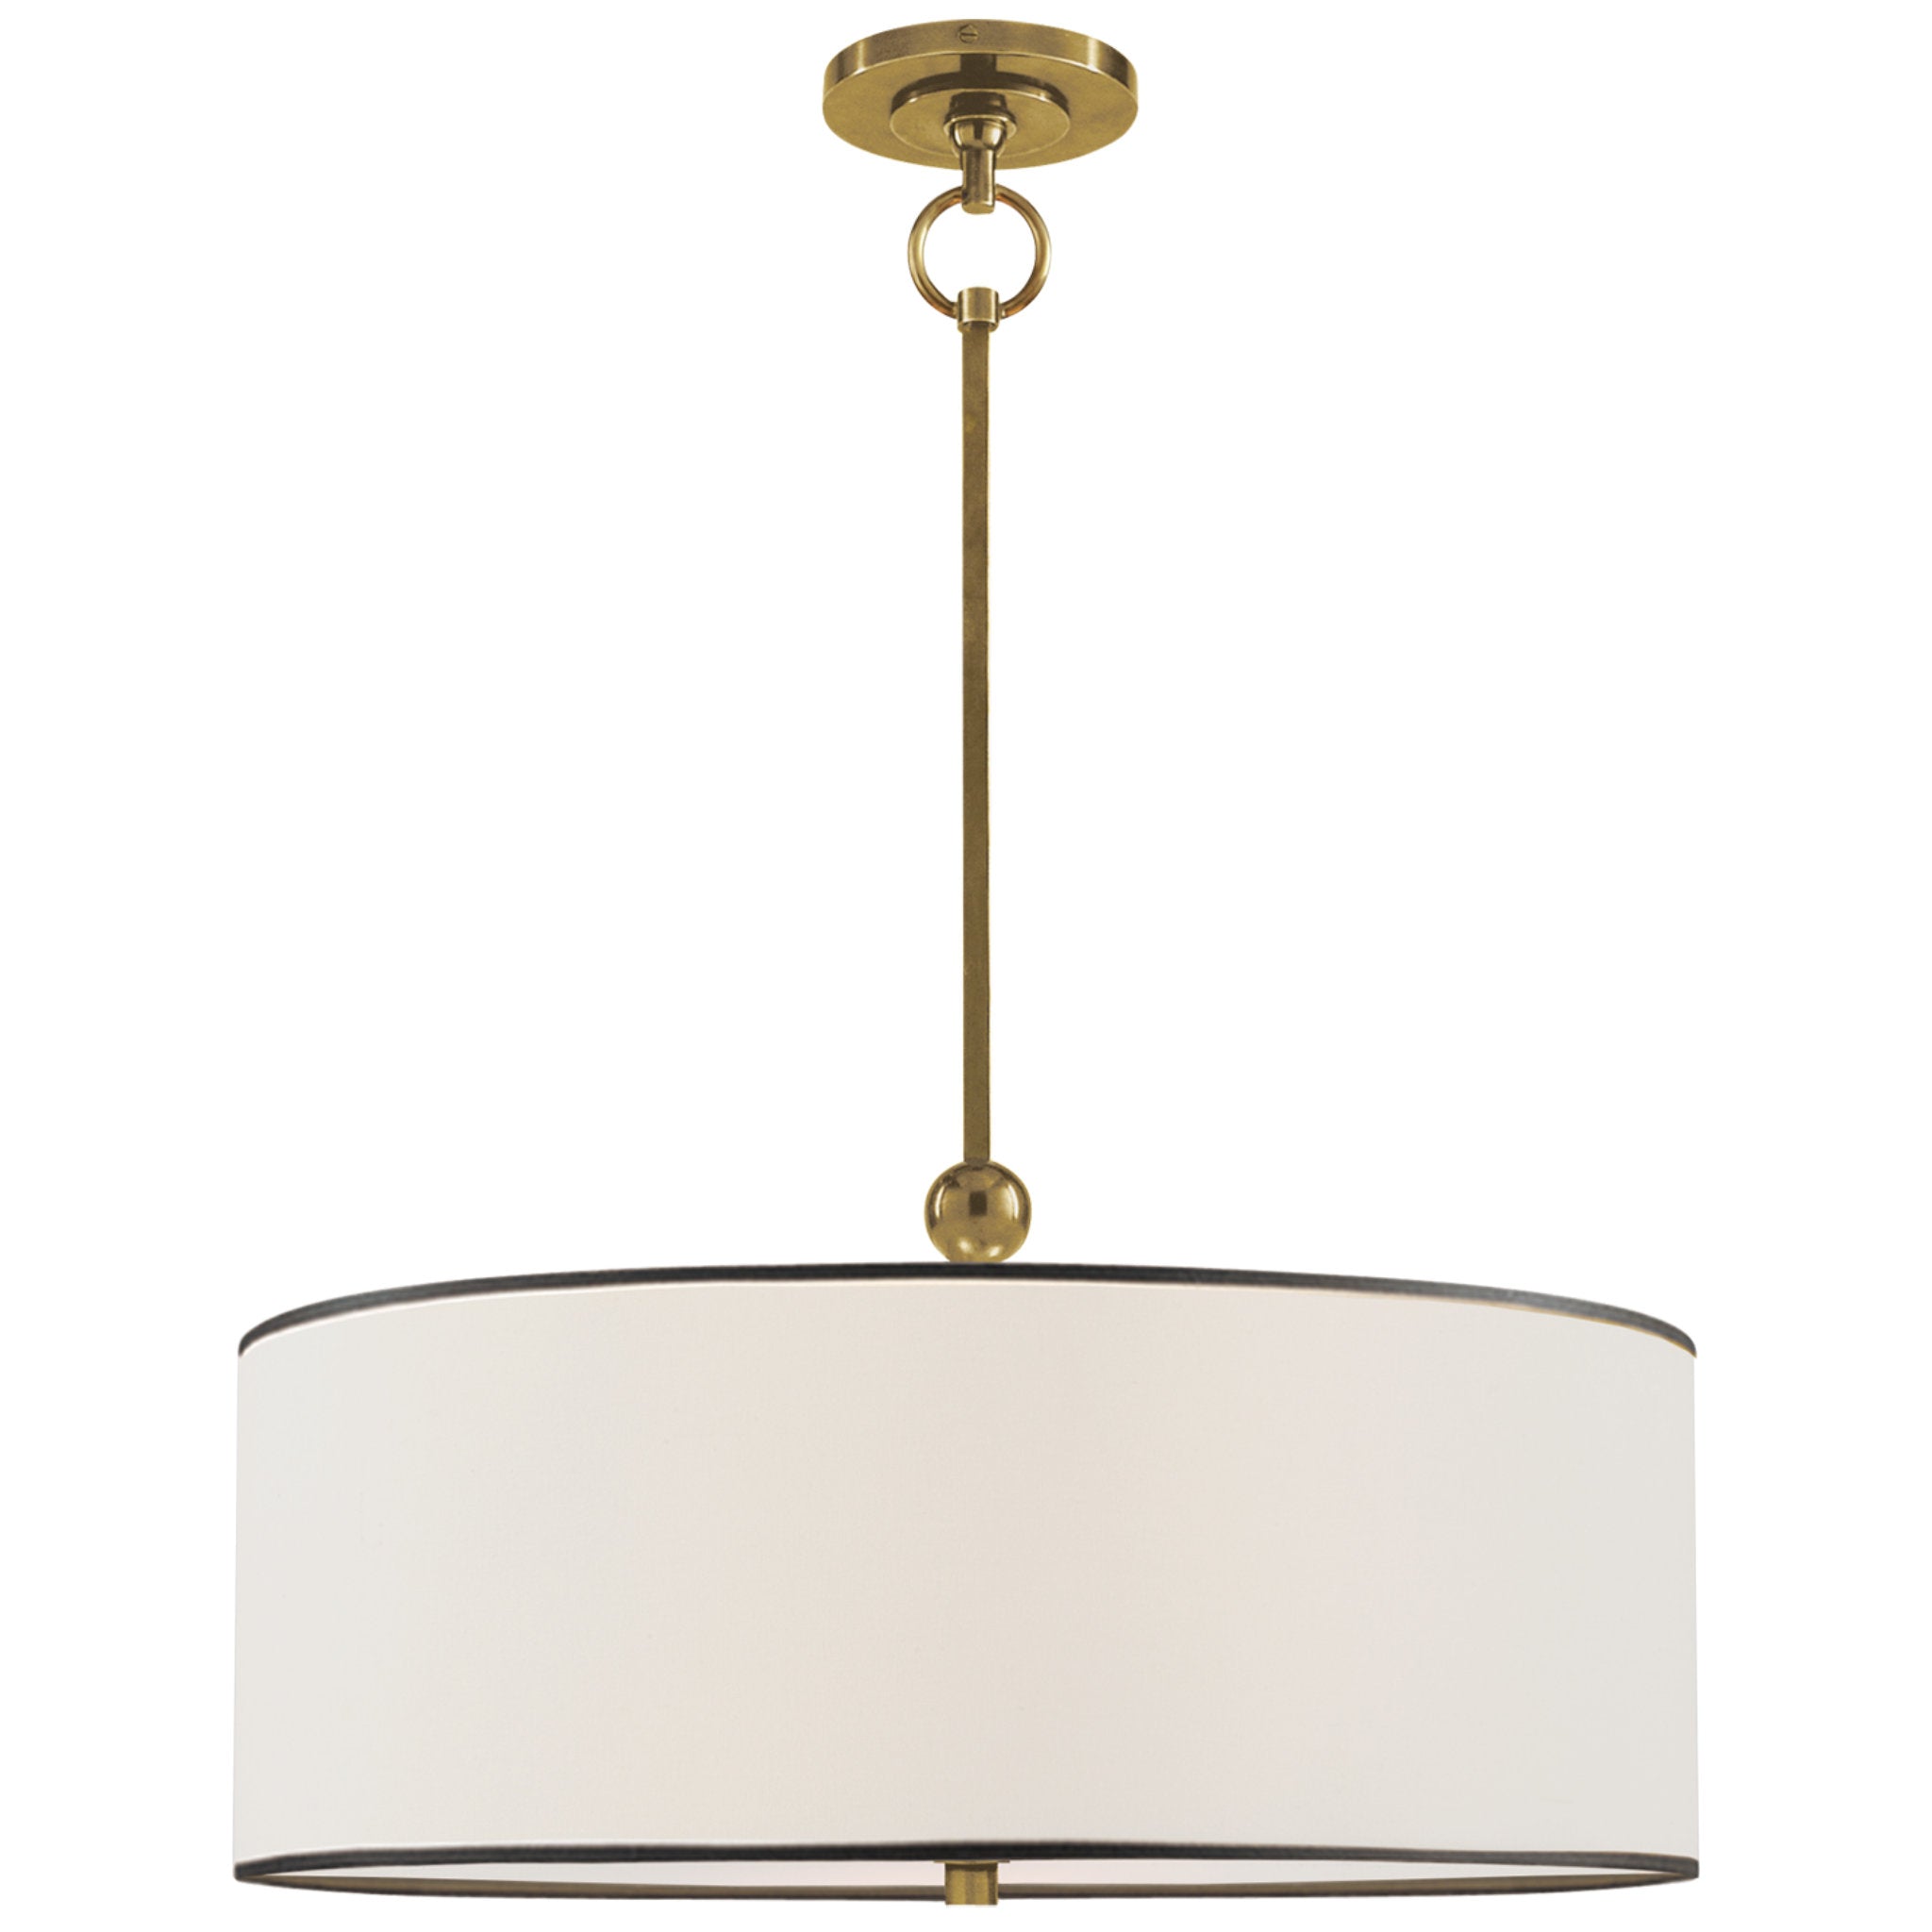 Thomas O'Brien Reed Hanging Shade in Hand-Rubbed Antique Brass with Linen Shade with Black Trim